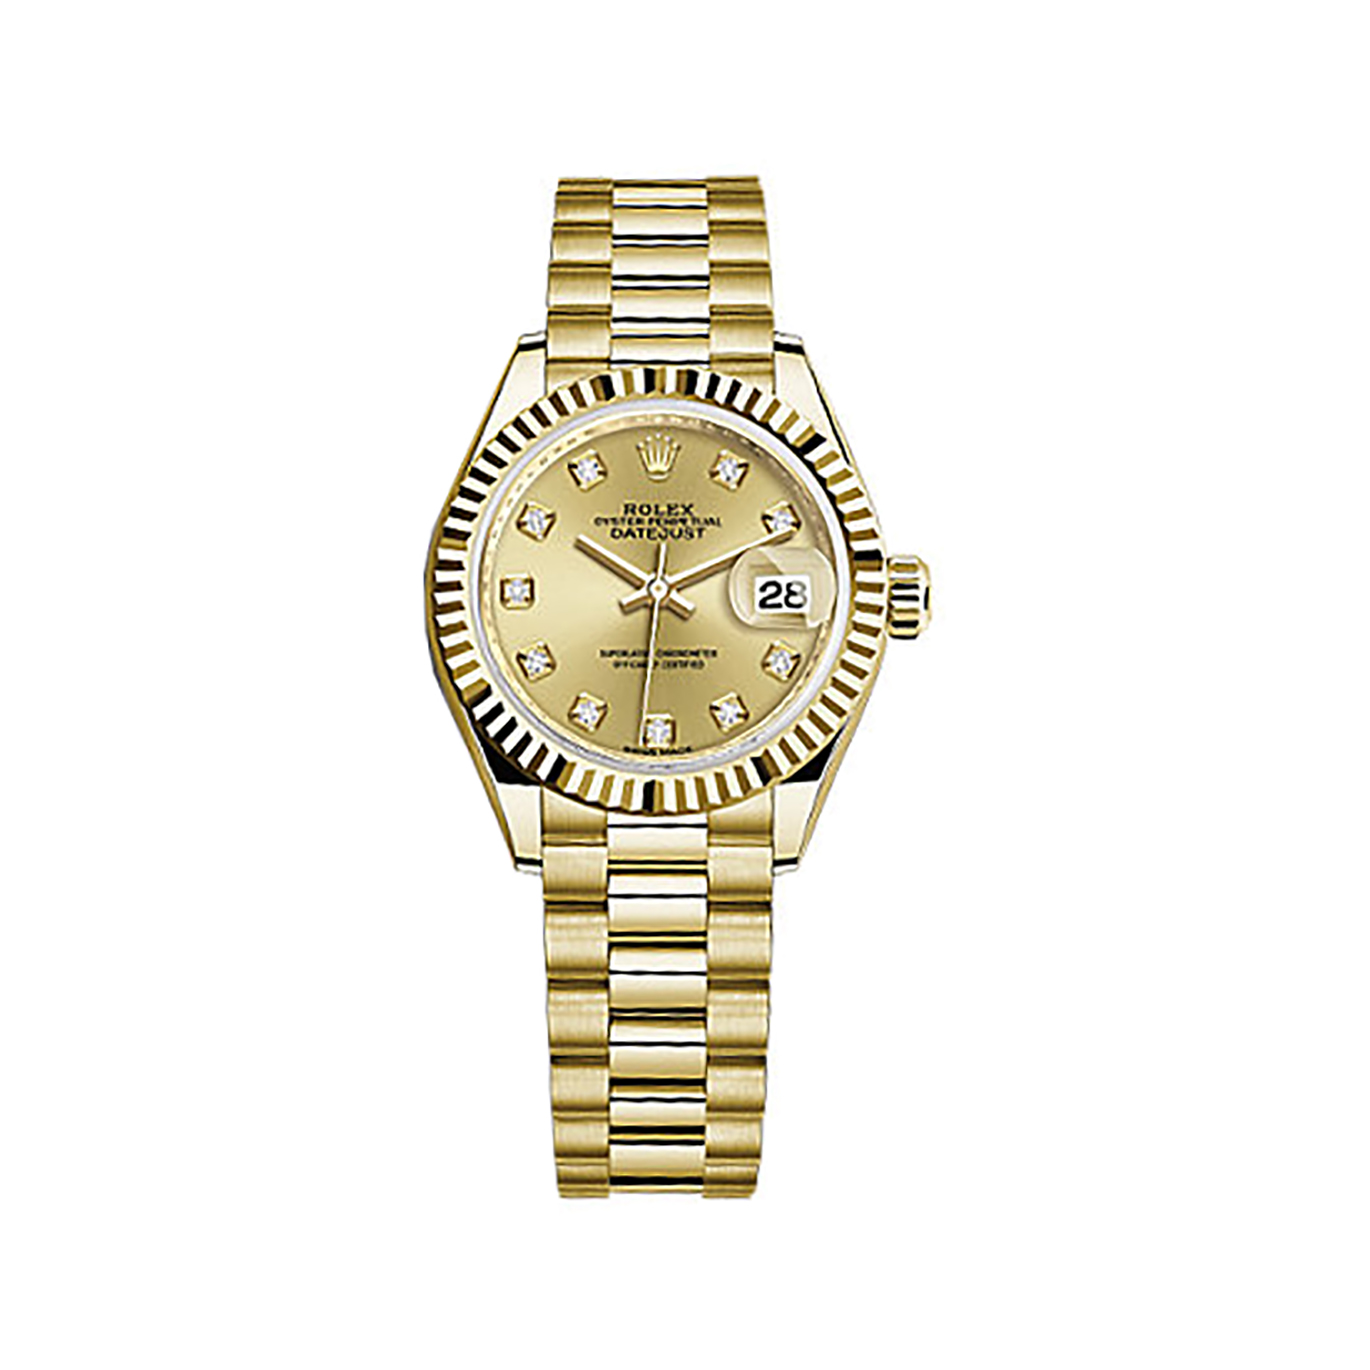 Lady-Datejust 28 279178 Gold Watch (Champagne Set with Diamonds) - Click Image to Close